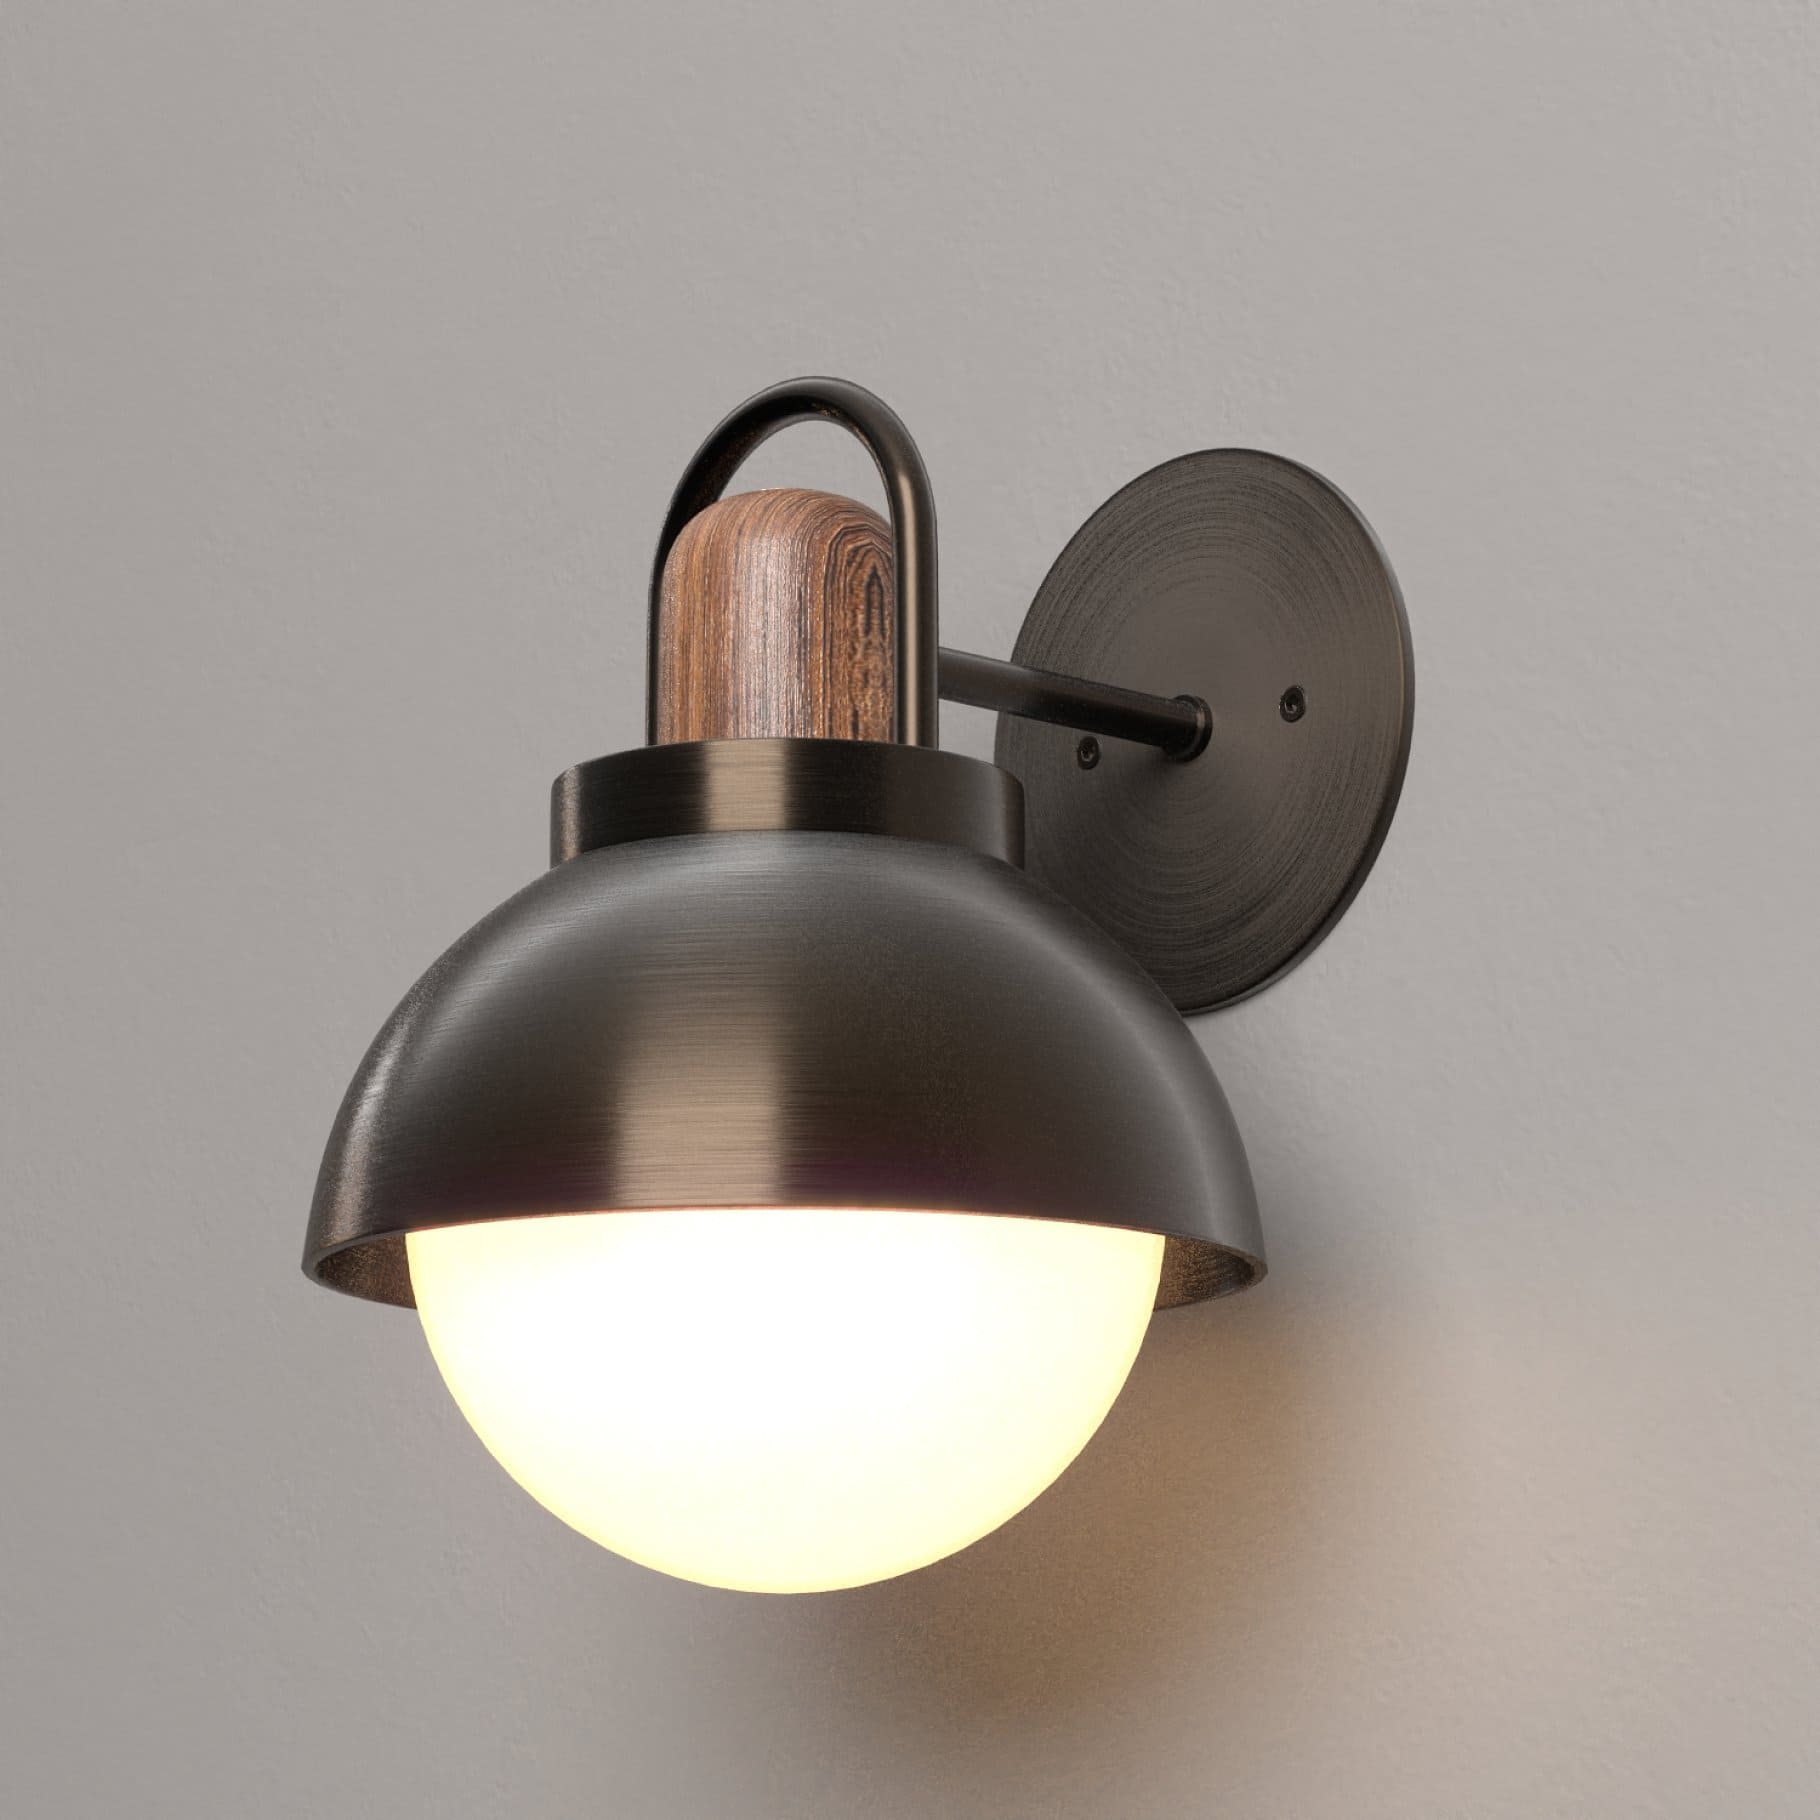 A sconce with metal and wooden elements hangs on the wall.